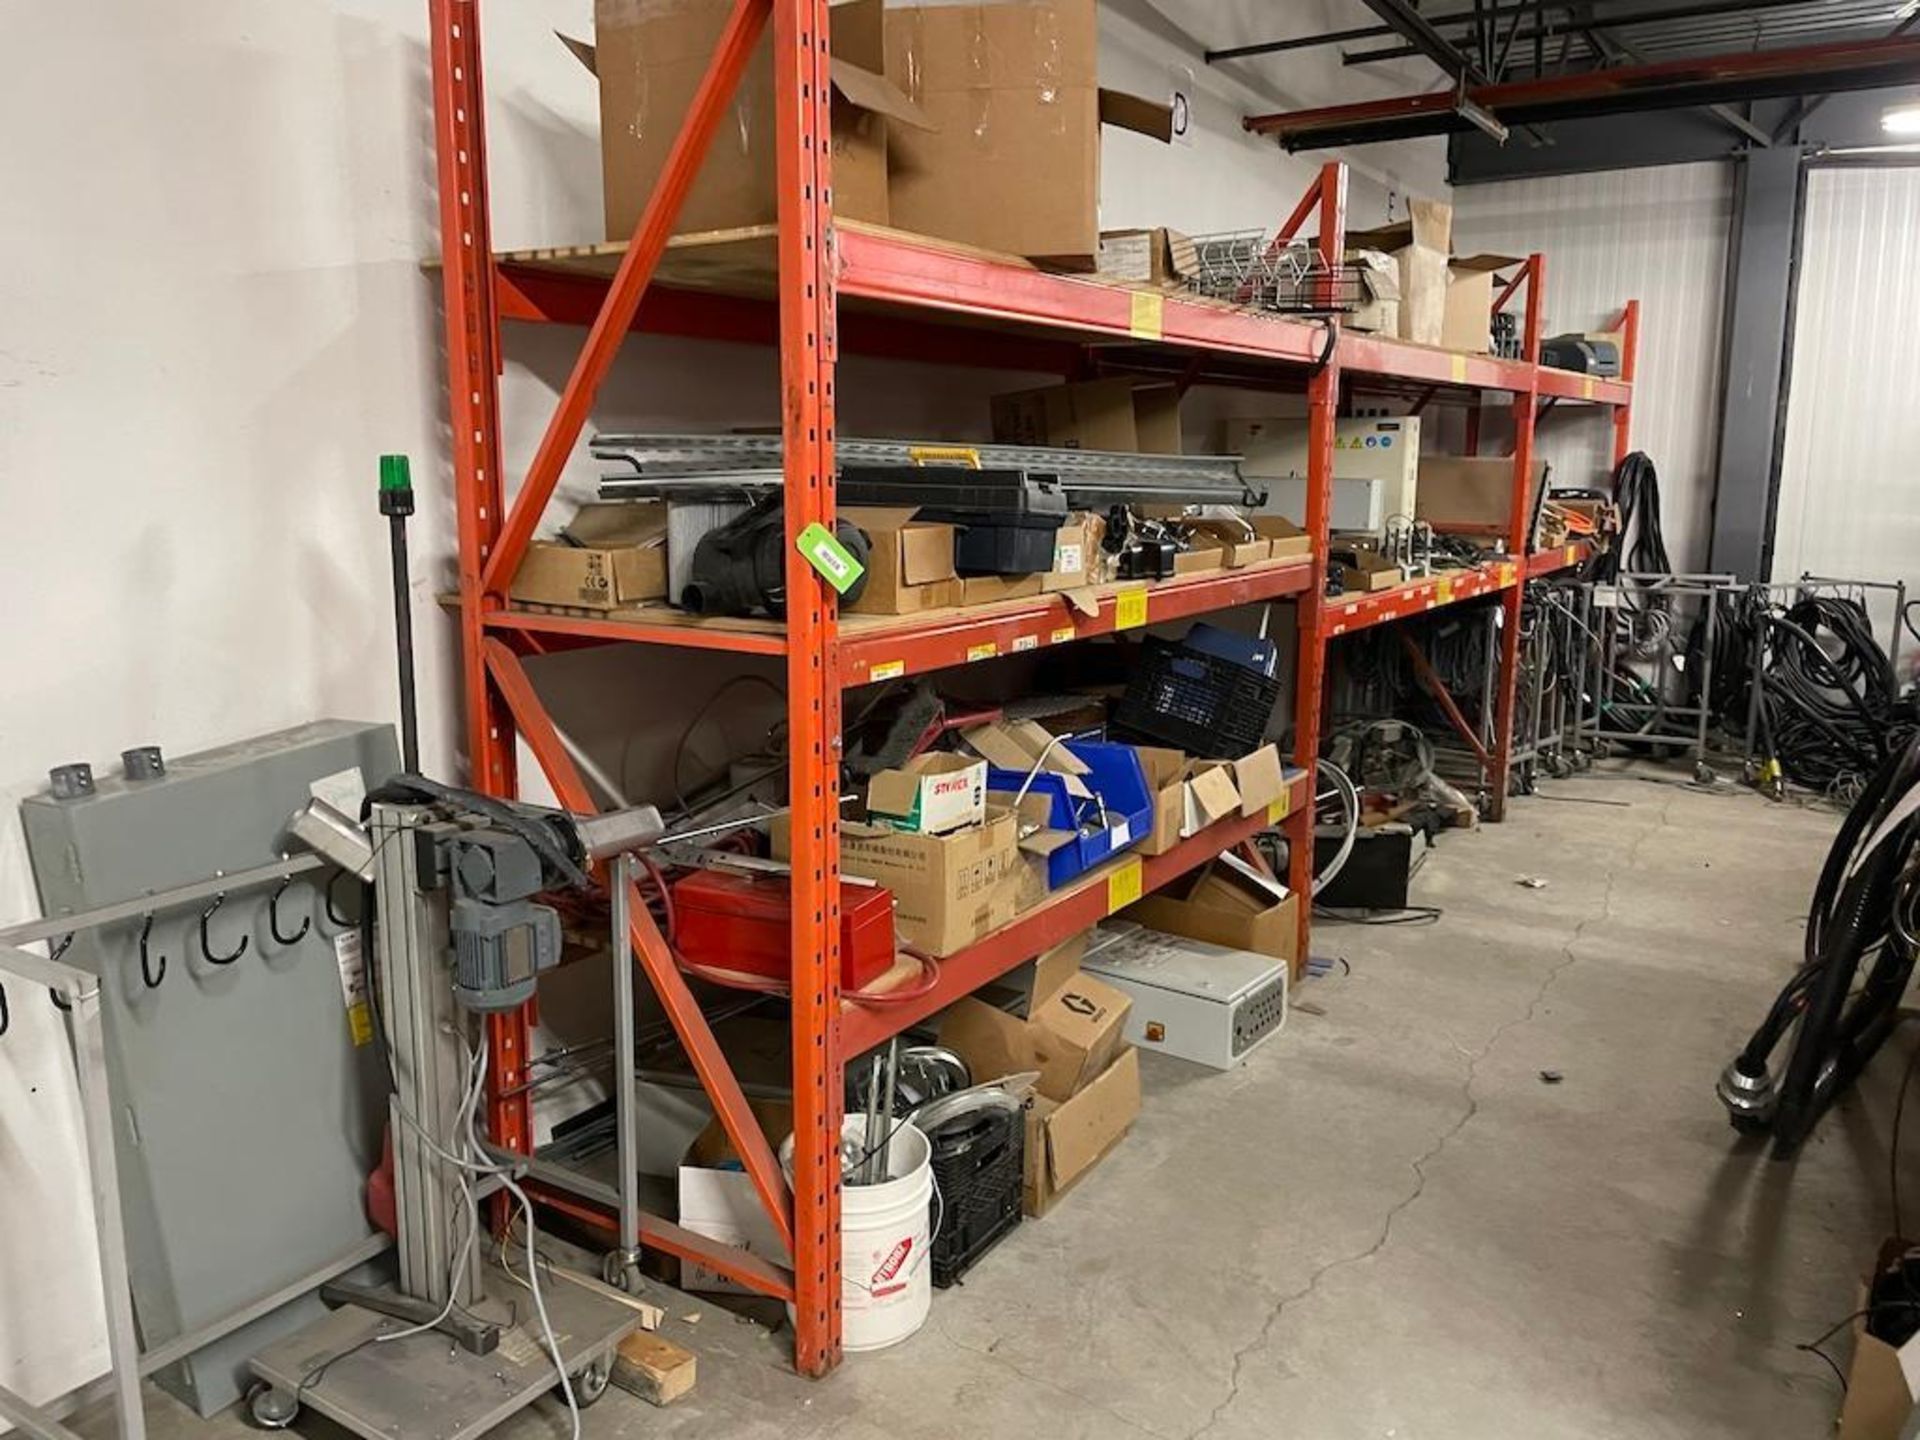 LOT STORES INVENTORY ROOM ON SECOND LEVEL, INCLUDING ALL PARTS, WIRING, FRAMING, CONTROL BOXES, 15 S - Image 2 of 16